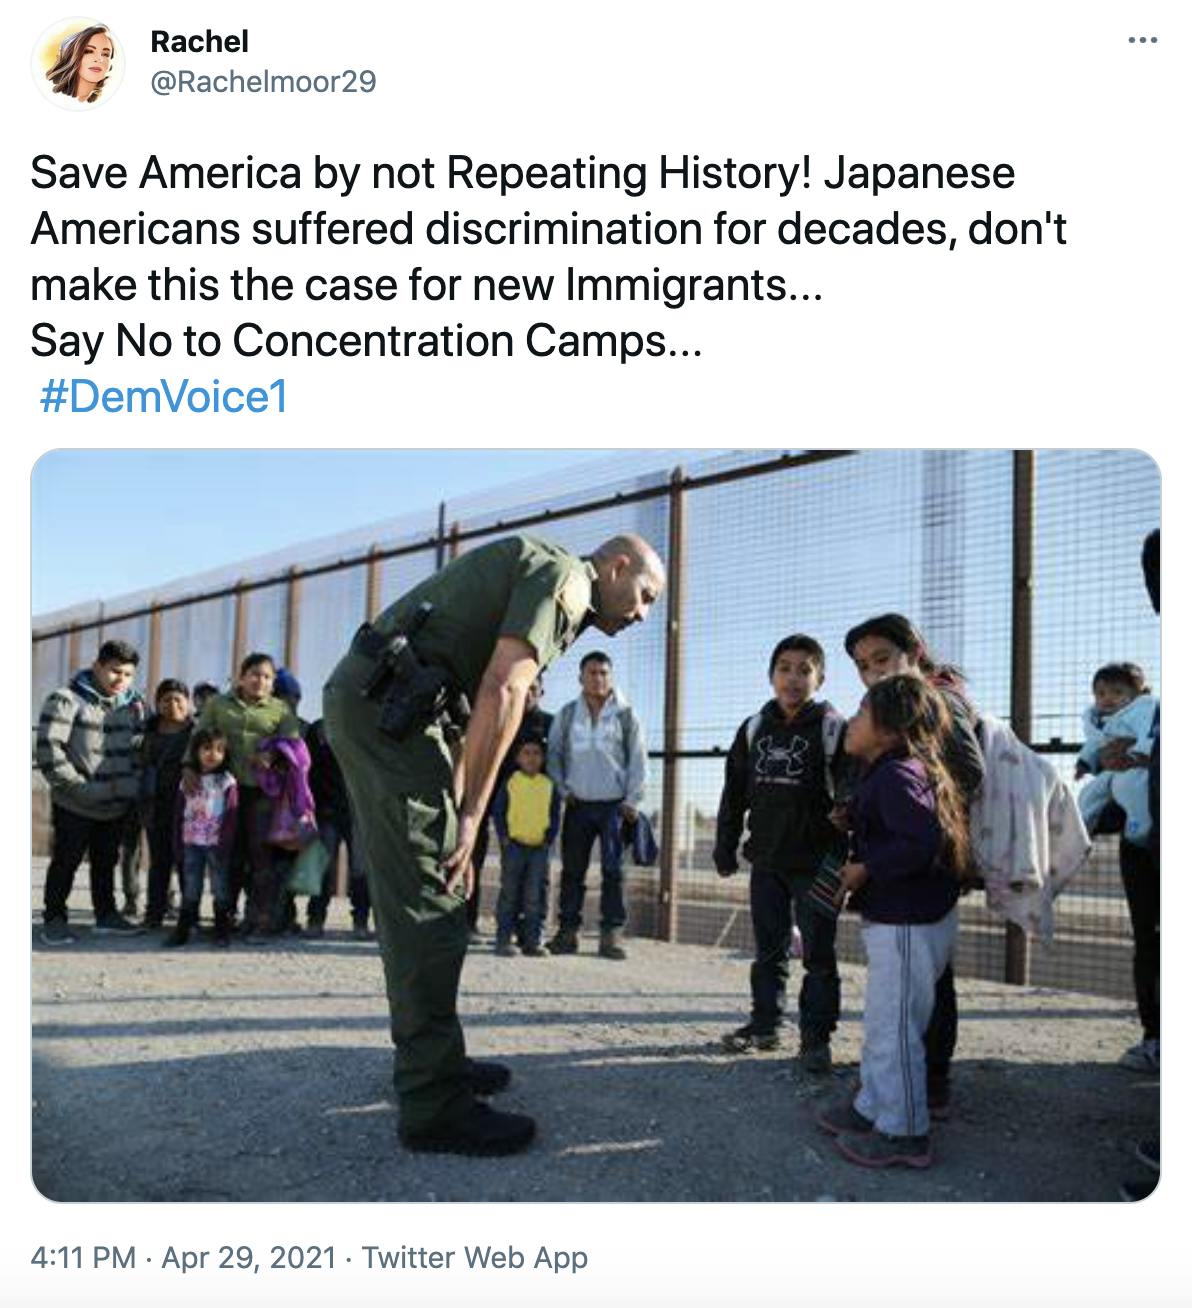 'Save America by not Repeating History! Japanese Americans suffered discrimination for decades, don't make this the case for new Immigrants... Say No to Concentration Camps... #DemVoice1' photograph of a soldier leaning down to speak to latino children by the wall